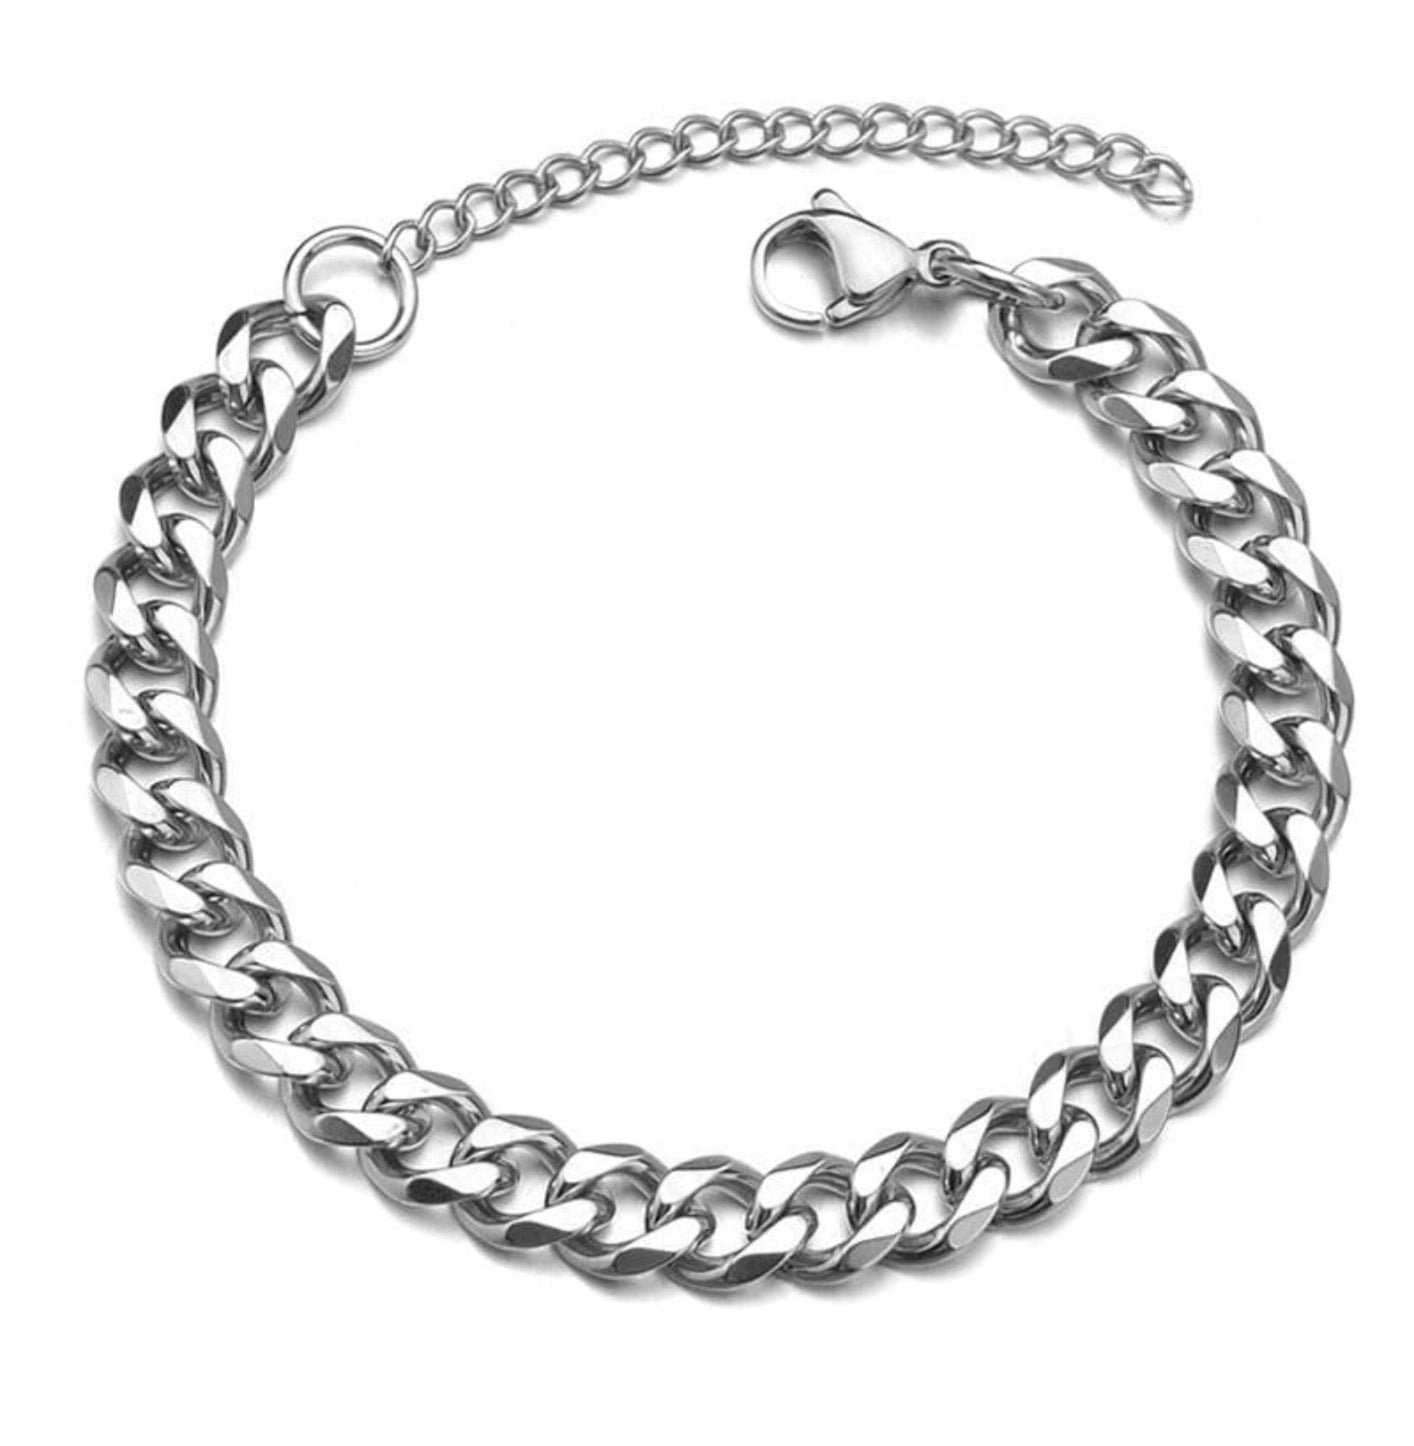 CUBAN BRACELET braclet Yubama Jewelry Online Store - The Elegant Designs of Gold and Silver ! 